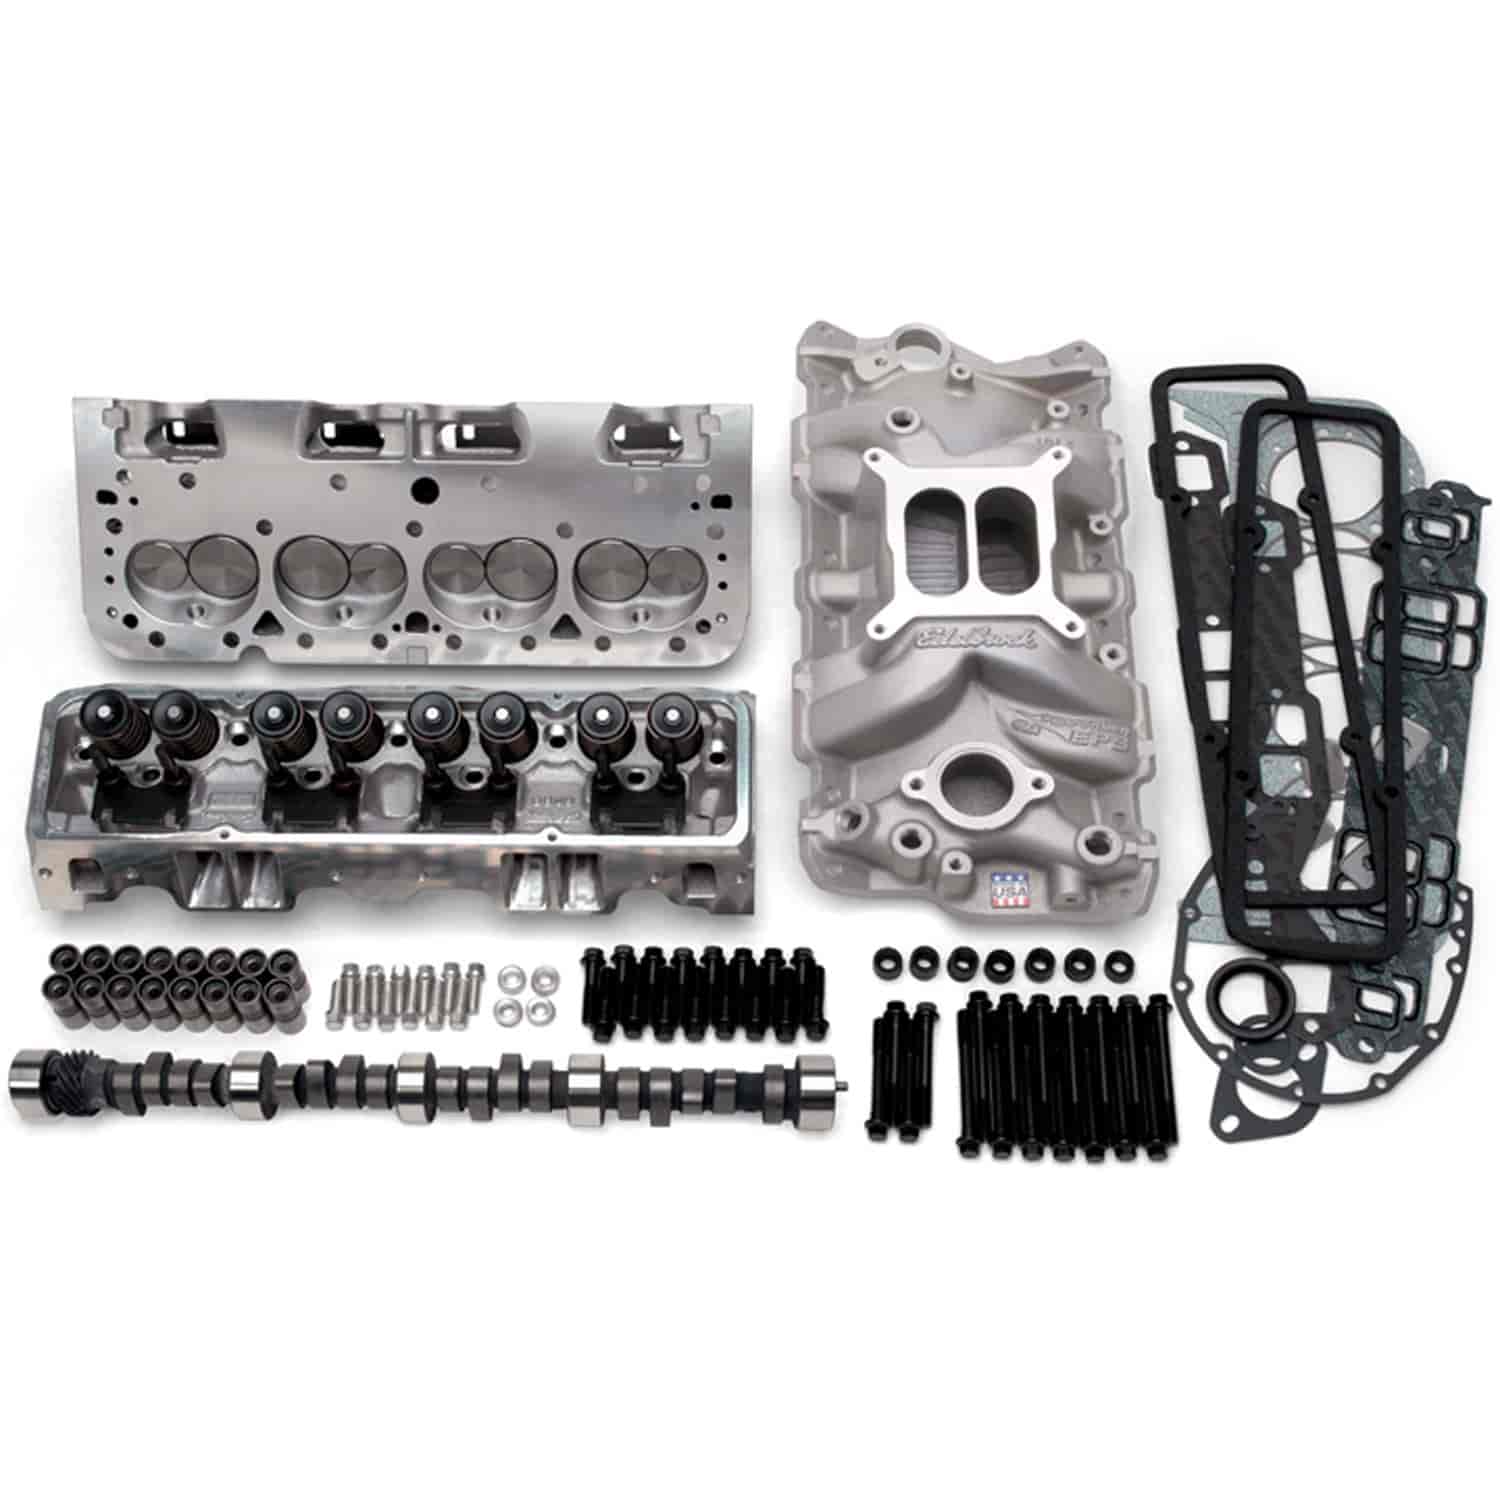 E-Street Power Package Top End Kit for 1955-1986 Small Block Chevy